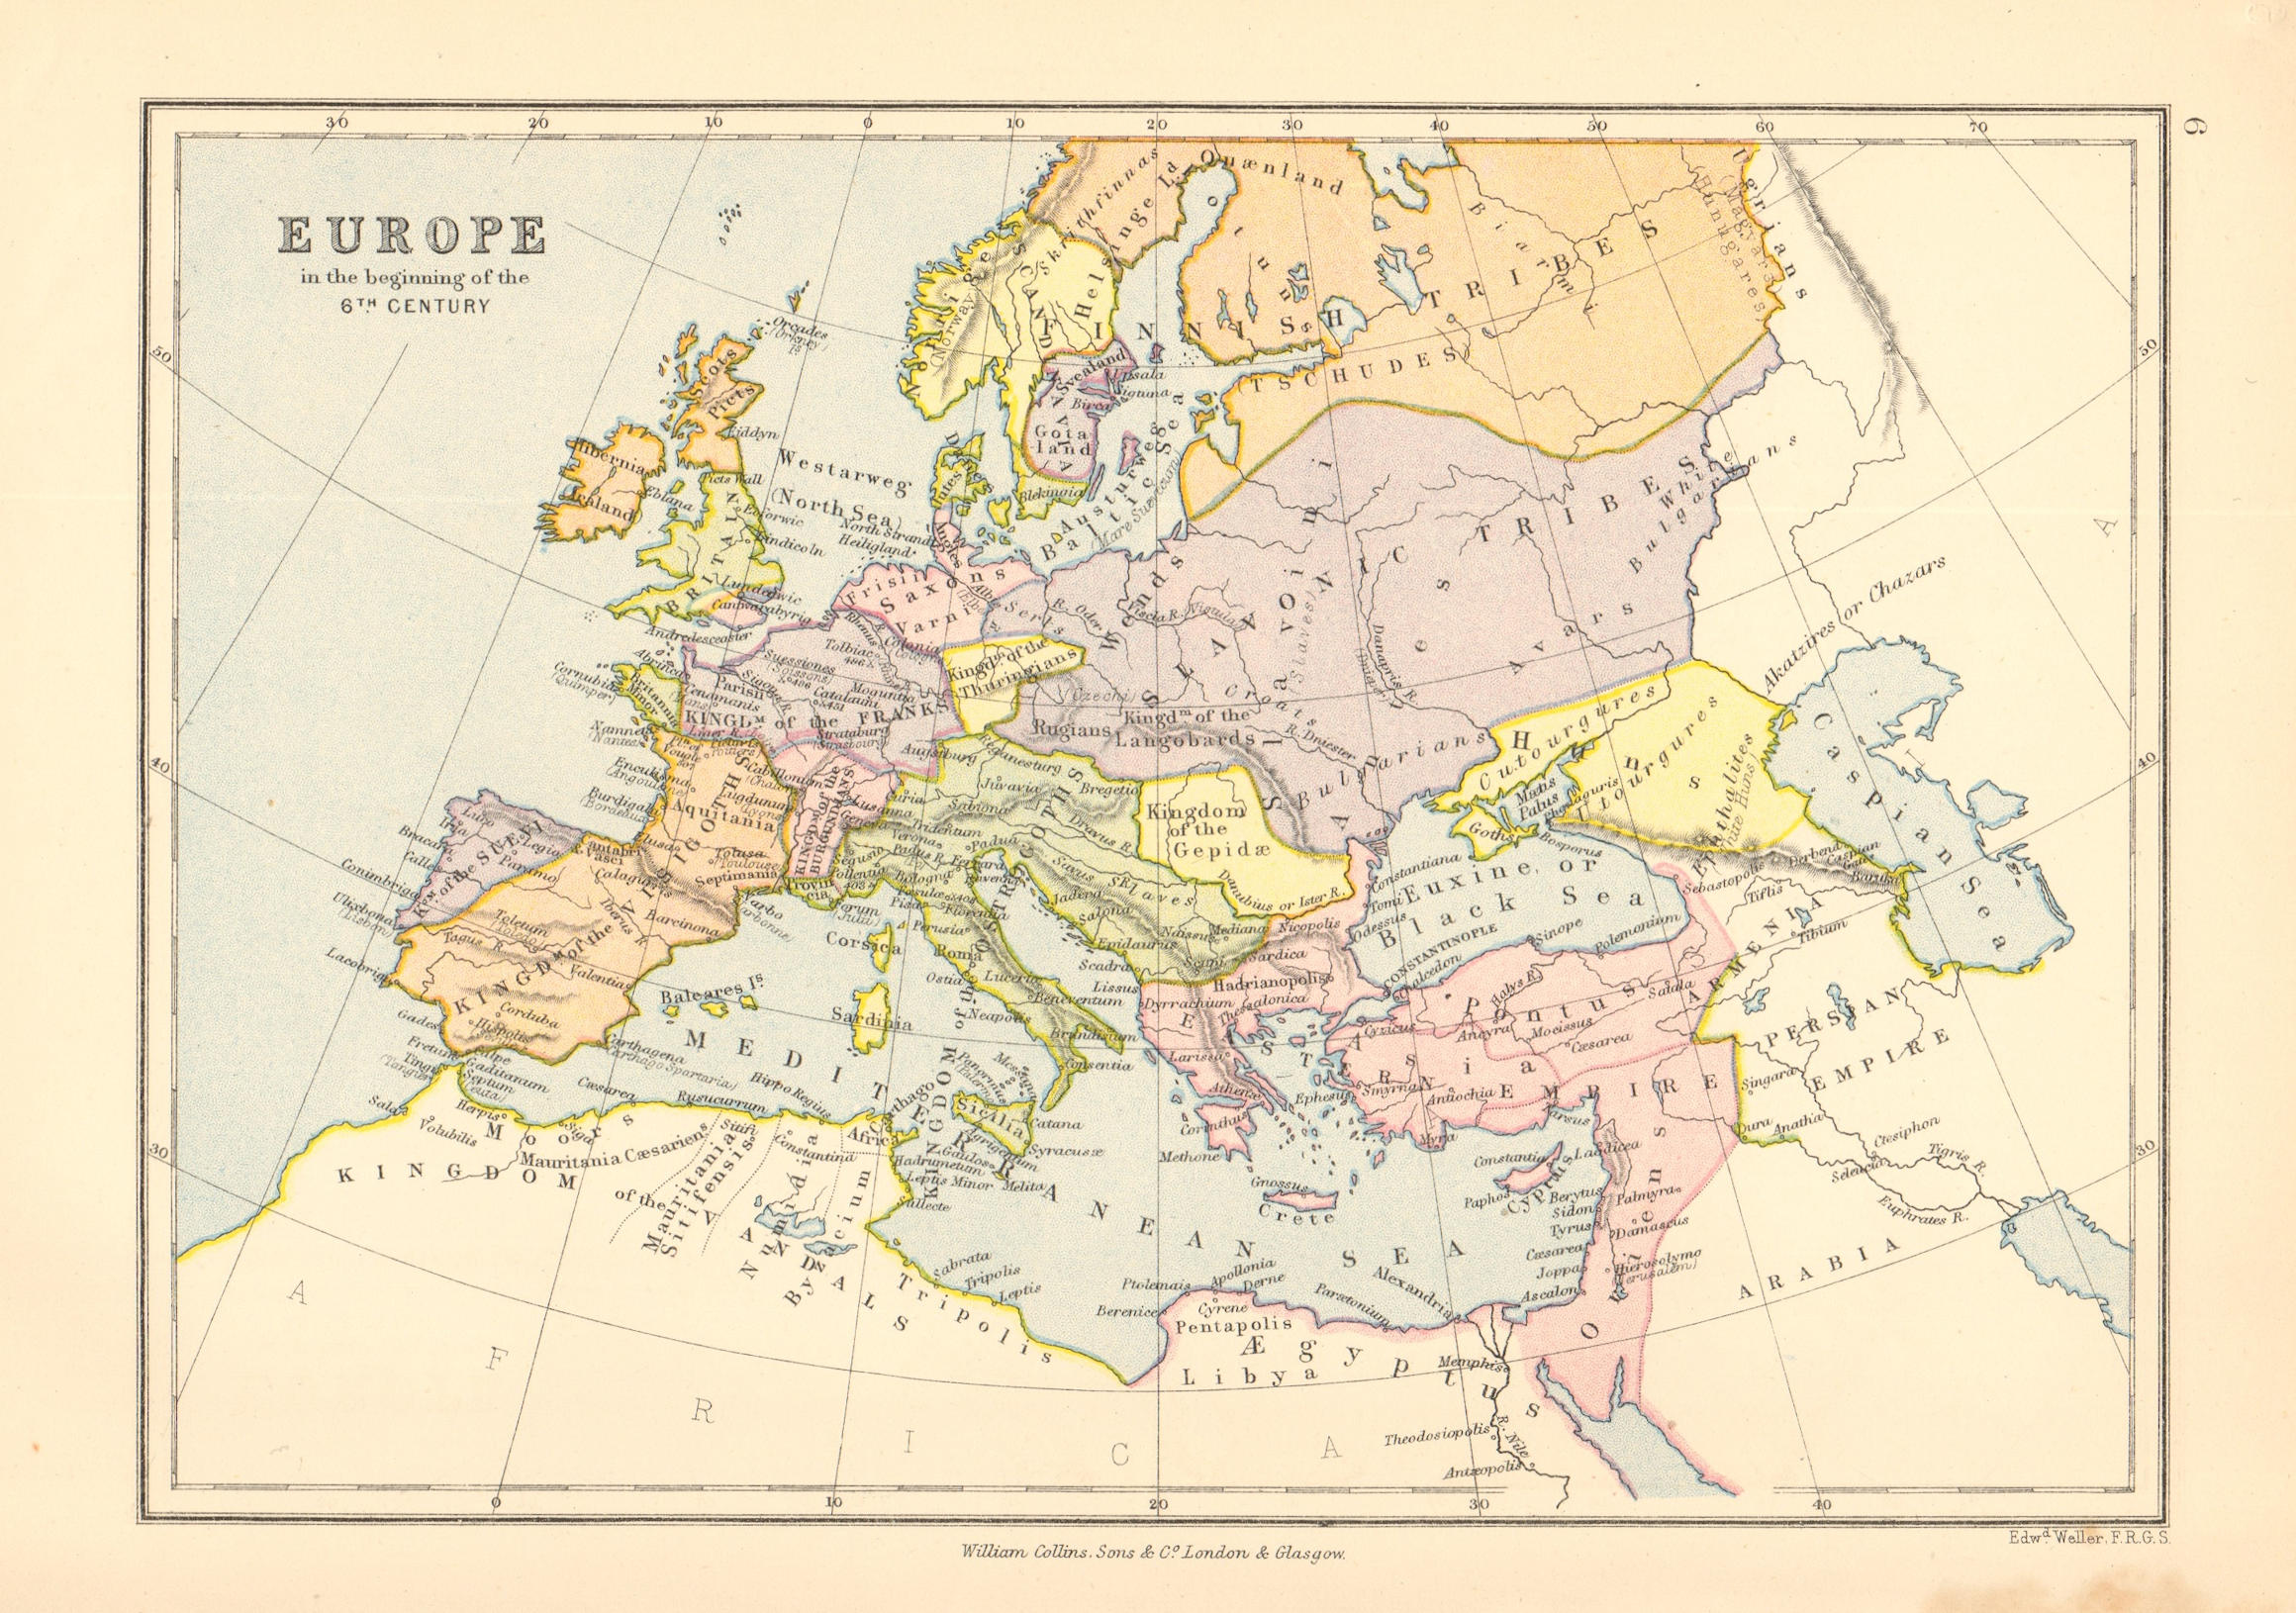 Associate Product 'Europe in the beginning of the 6th Century'. BARTHOLOMEW 1876 old antique map